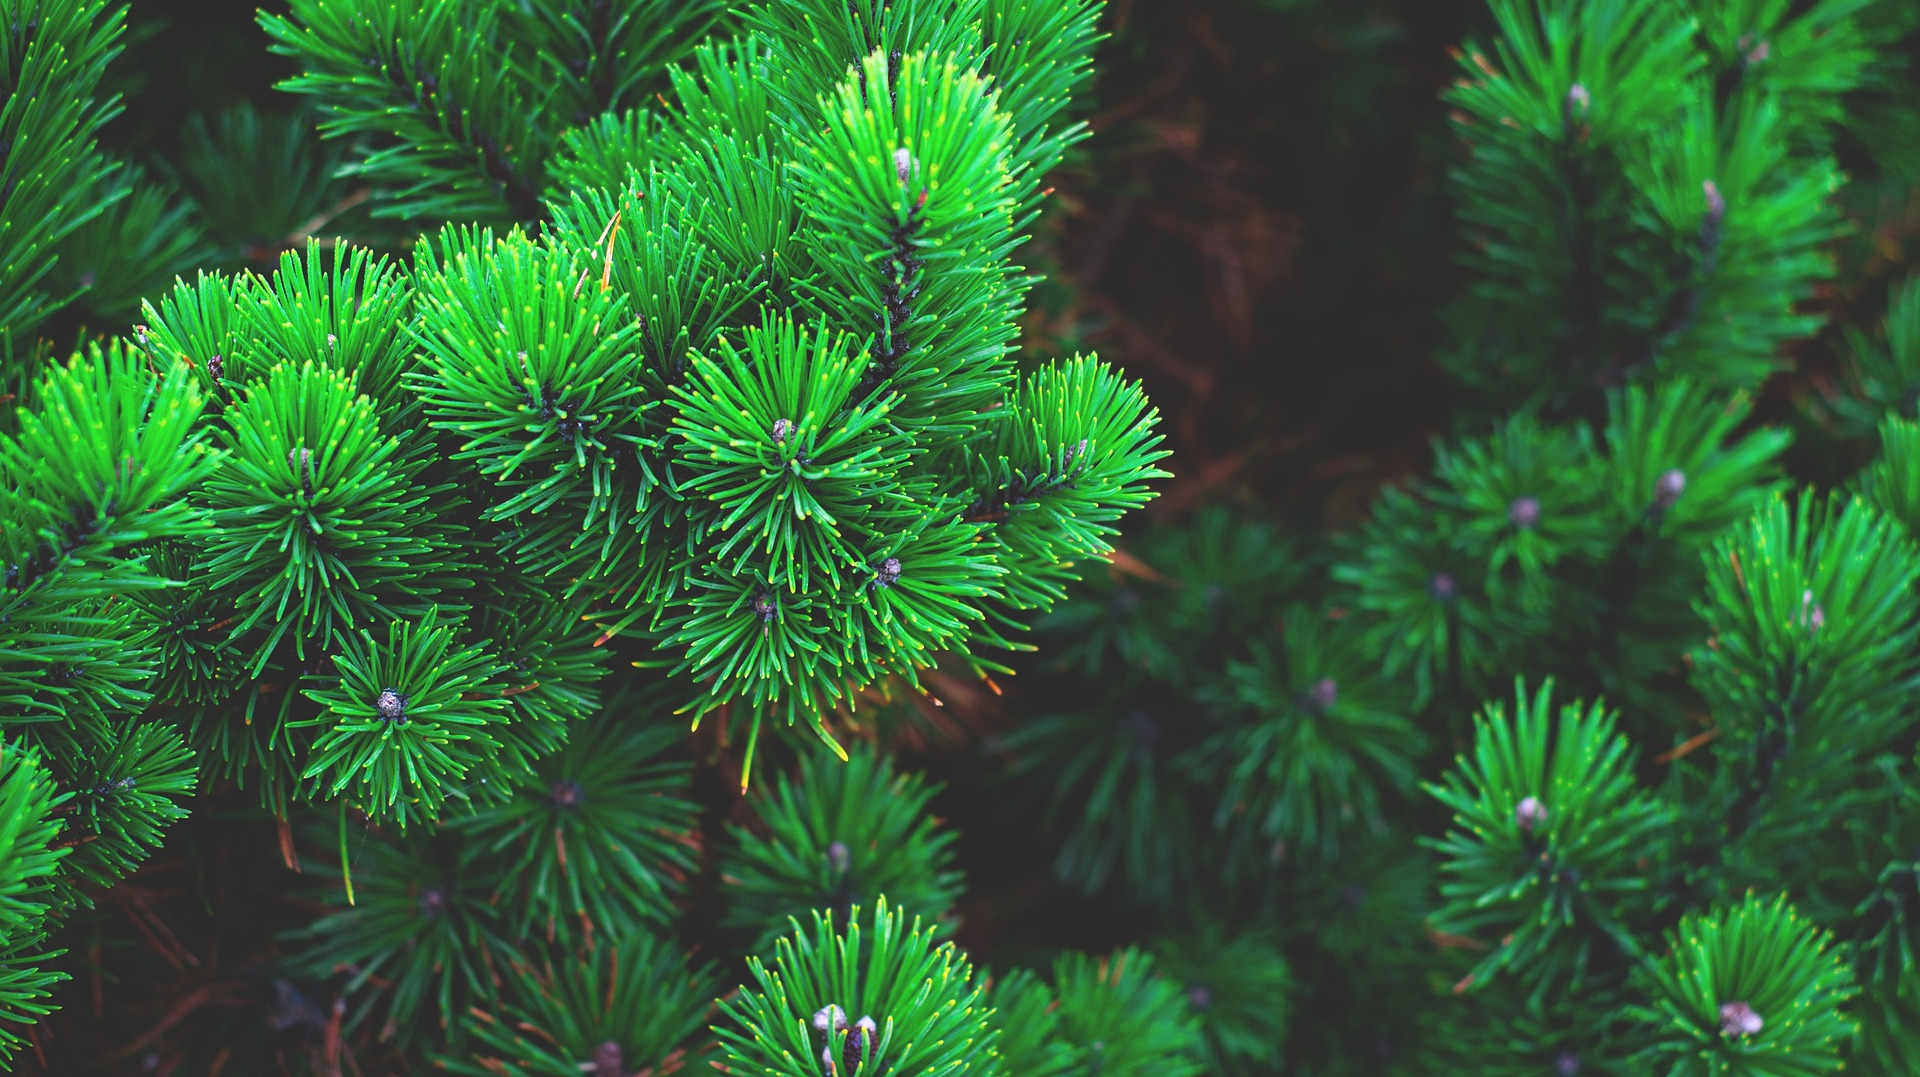 Pine tree branches used to make Pine Essential Oil